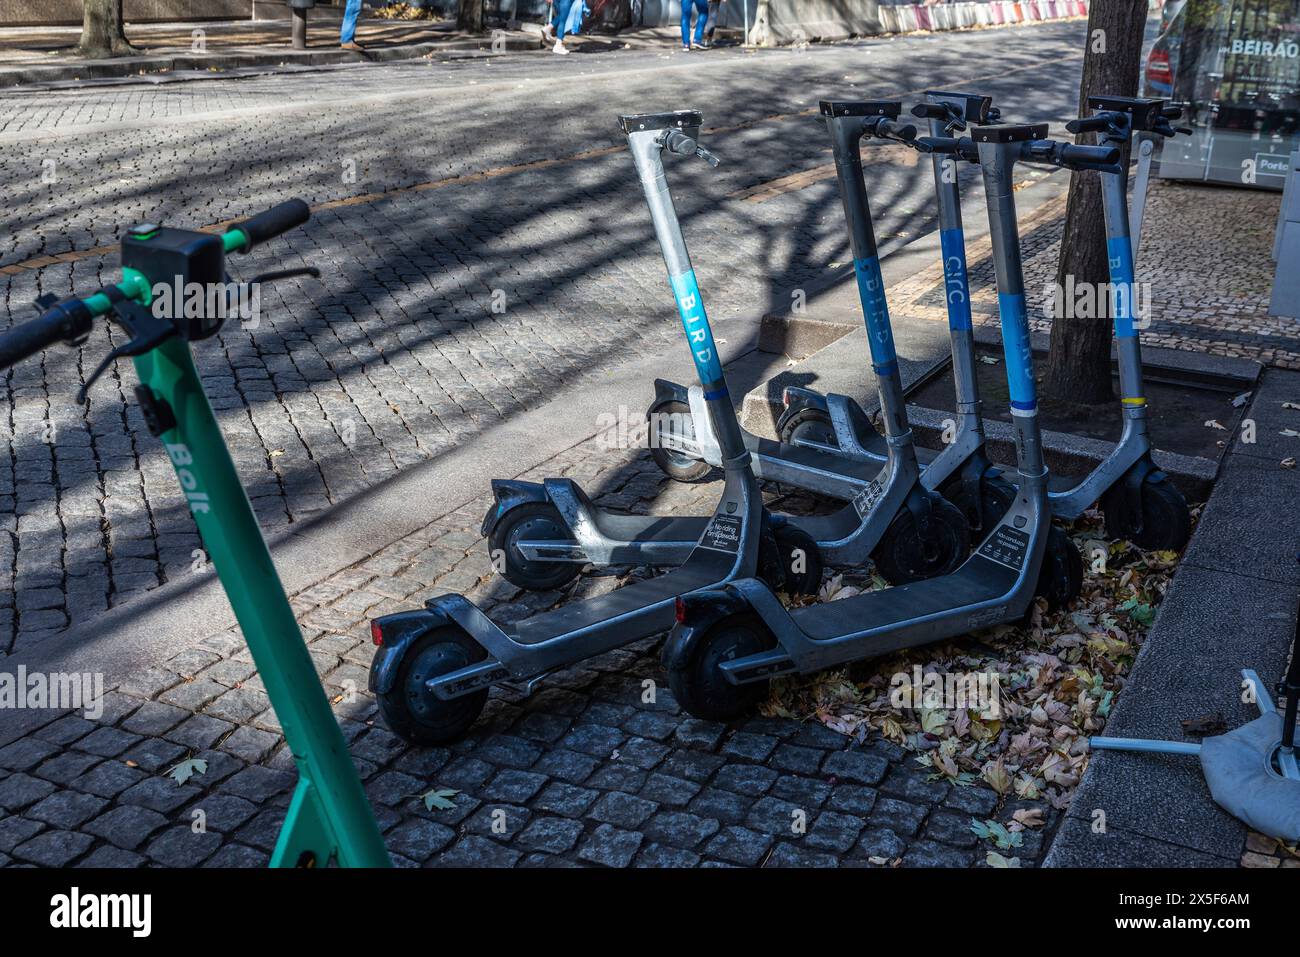 Oporto, Portugal - November 23, 2023: Electric kick scooters or e-scooters rental of the Bolt, Bird or Circ brand and sharing parked on a street in Op Stock Photo